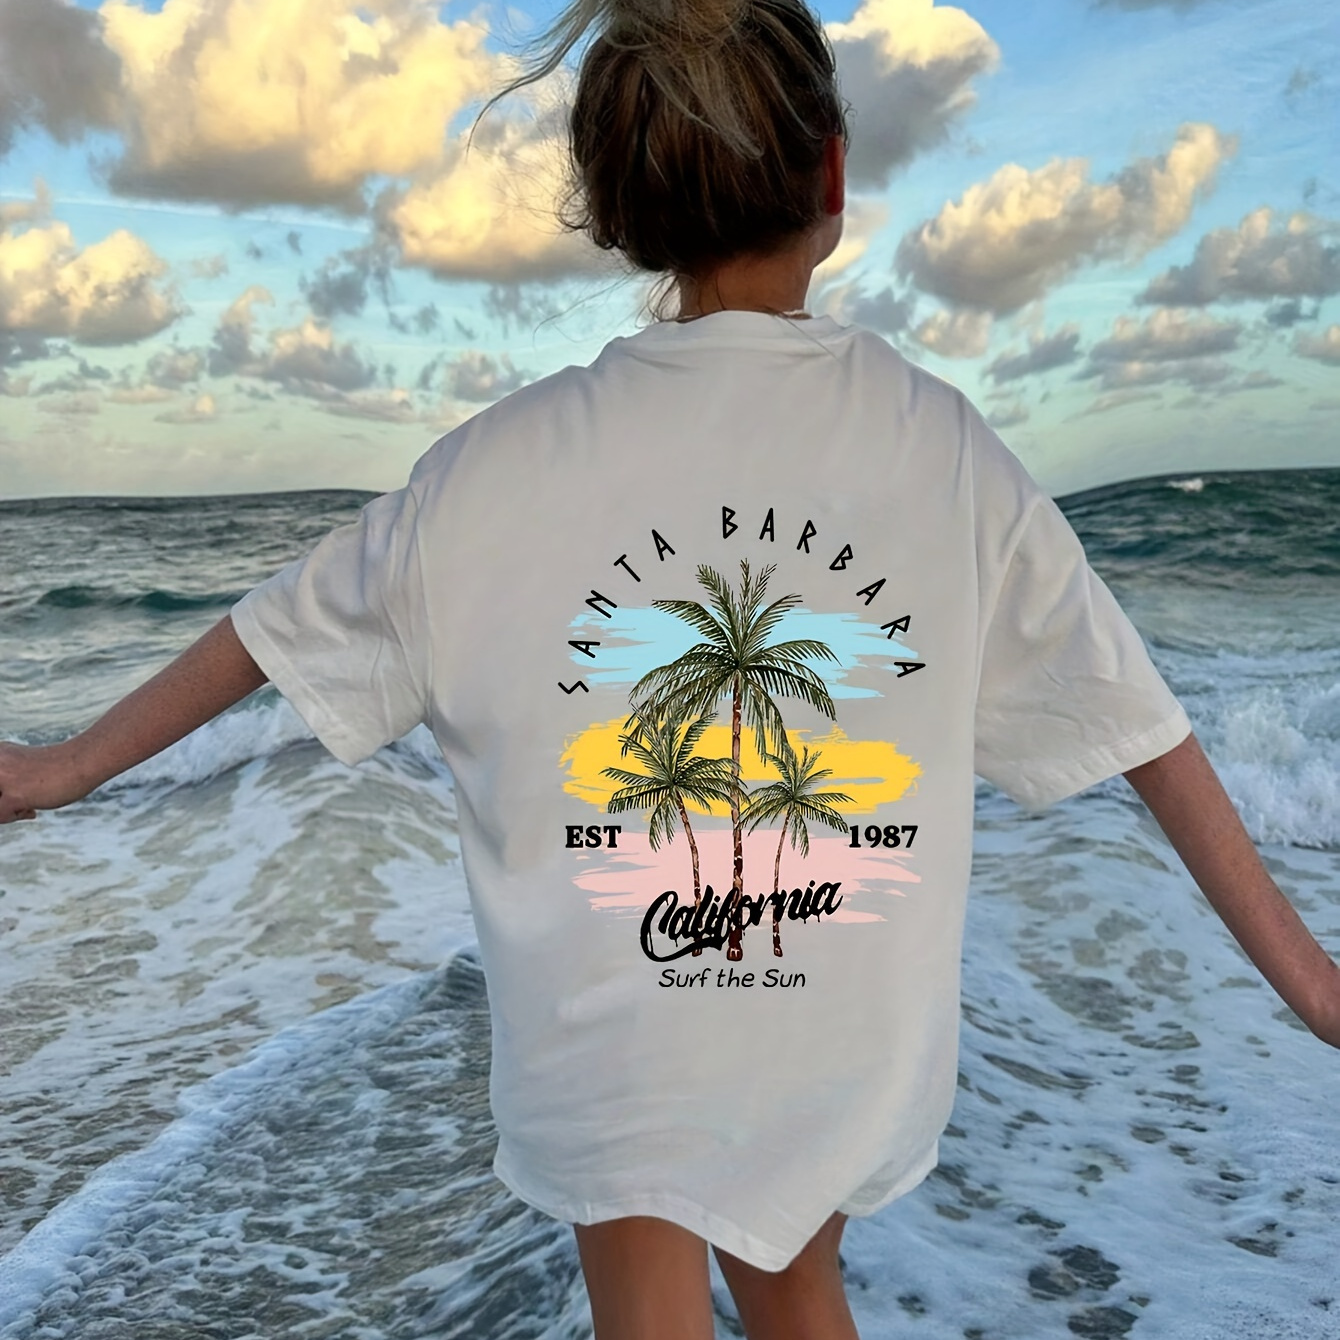 

Girls Summer Casual Fashion Palm Tree & California Surf The Sun Printed T-shirt Top, Short Sleeves, Round Neck, Comfort Fit - Youthful Style